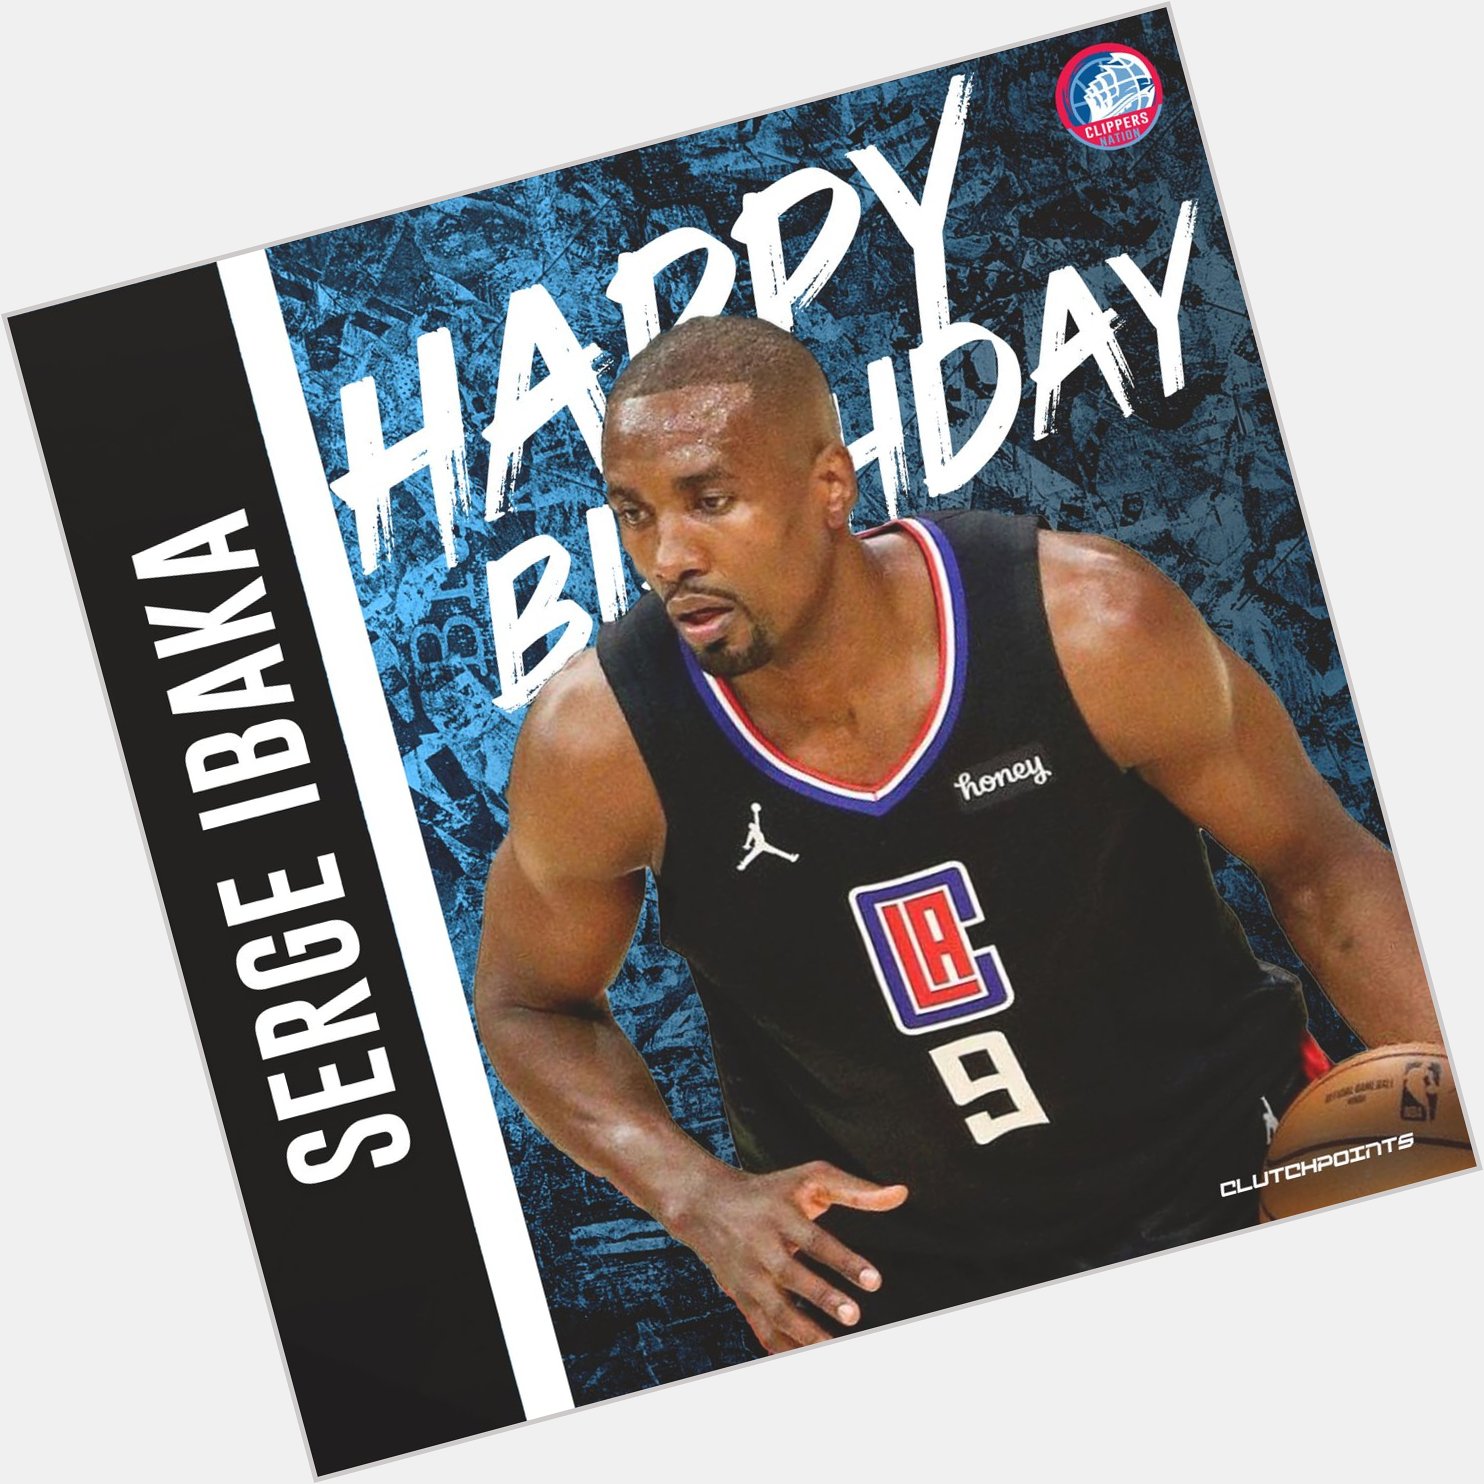 Join Clippers Nation in greeting Serge Ibaka a happy 32nd birthday!  